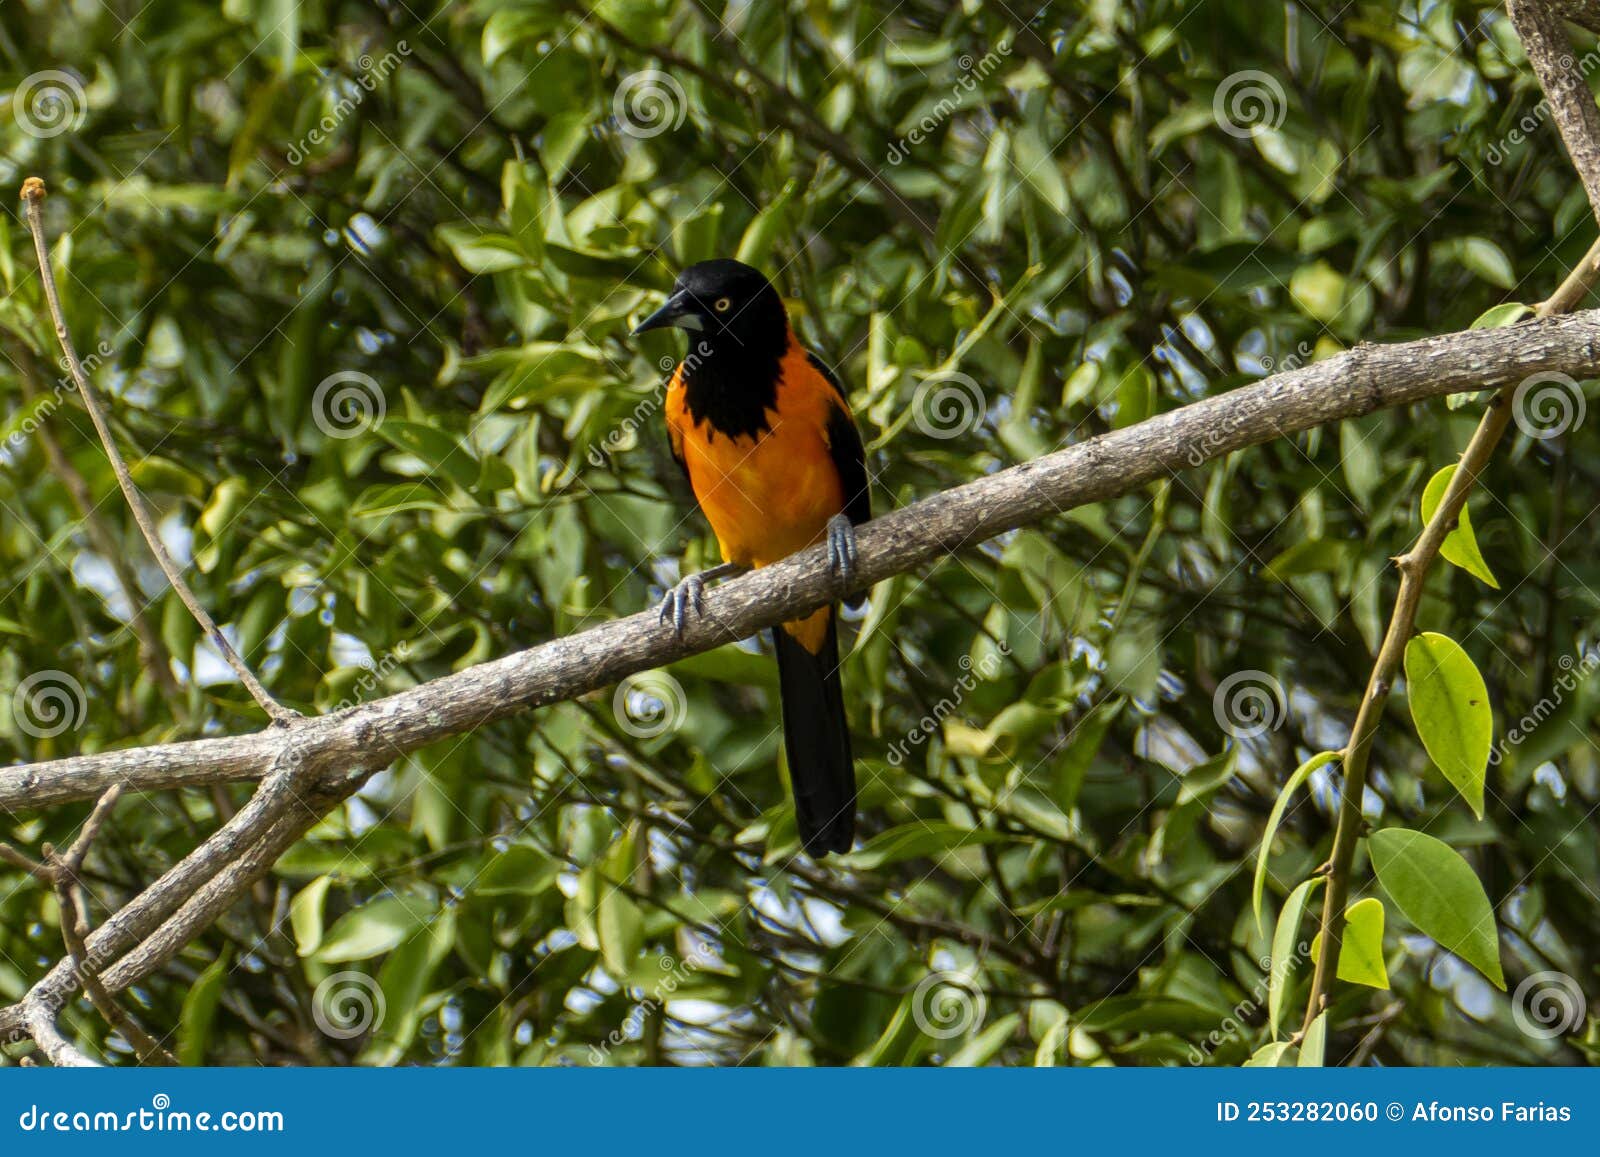 the campo troupial or campo oriole icterus jamacaii is a species of bird in the family icteridae